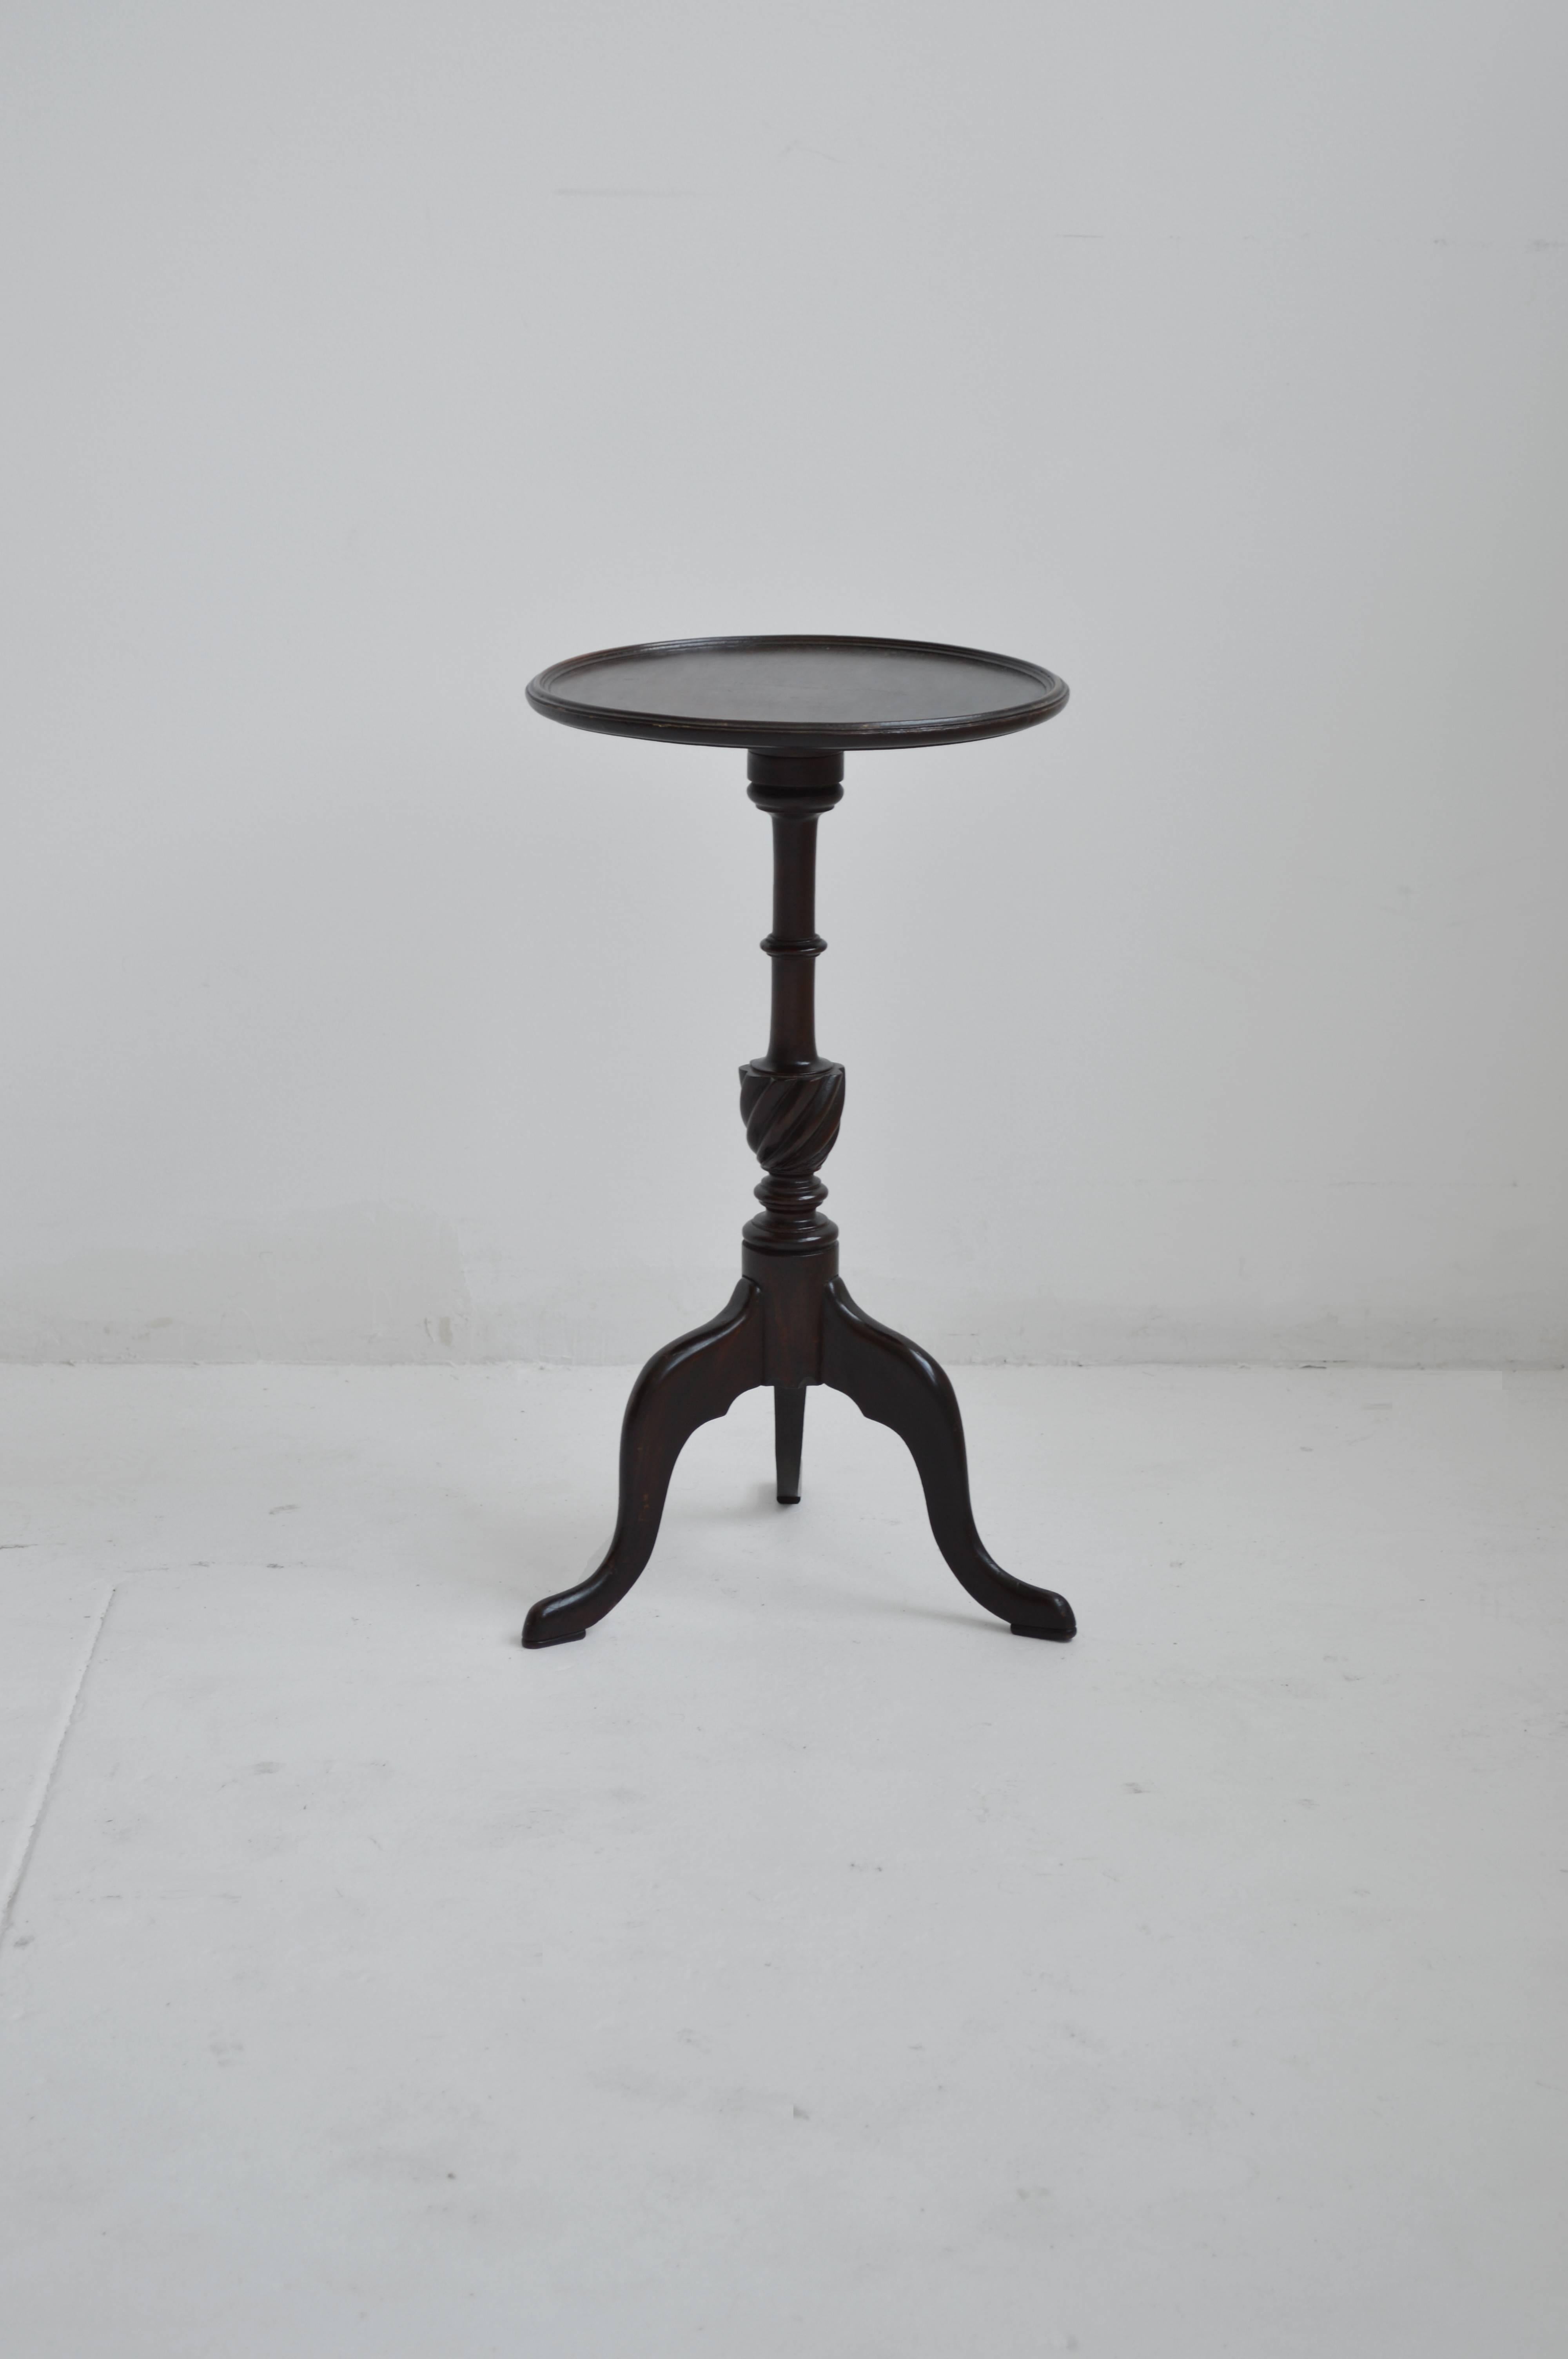 Lovely vintage carved mahogany wine or lamp table from the Edwardian-era. Originally from Scotland, circa 1900, this drink table features a raised pie-crust edge around the circumference of the top and is set on a turned pedestal tripod base with